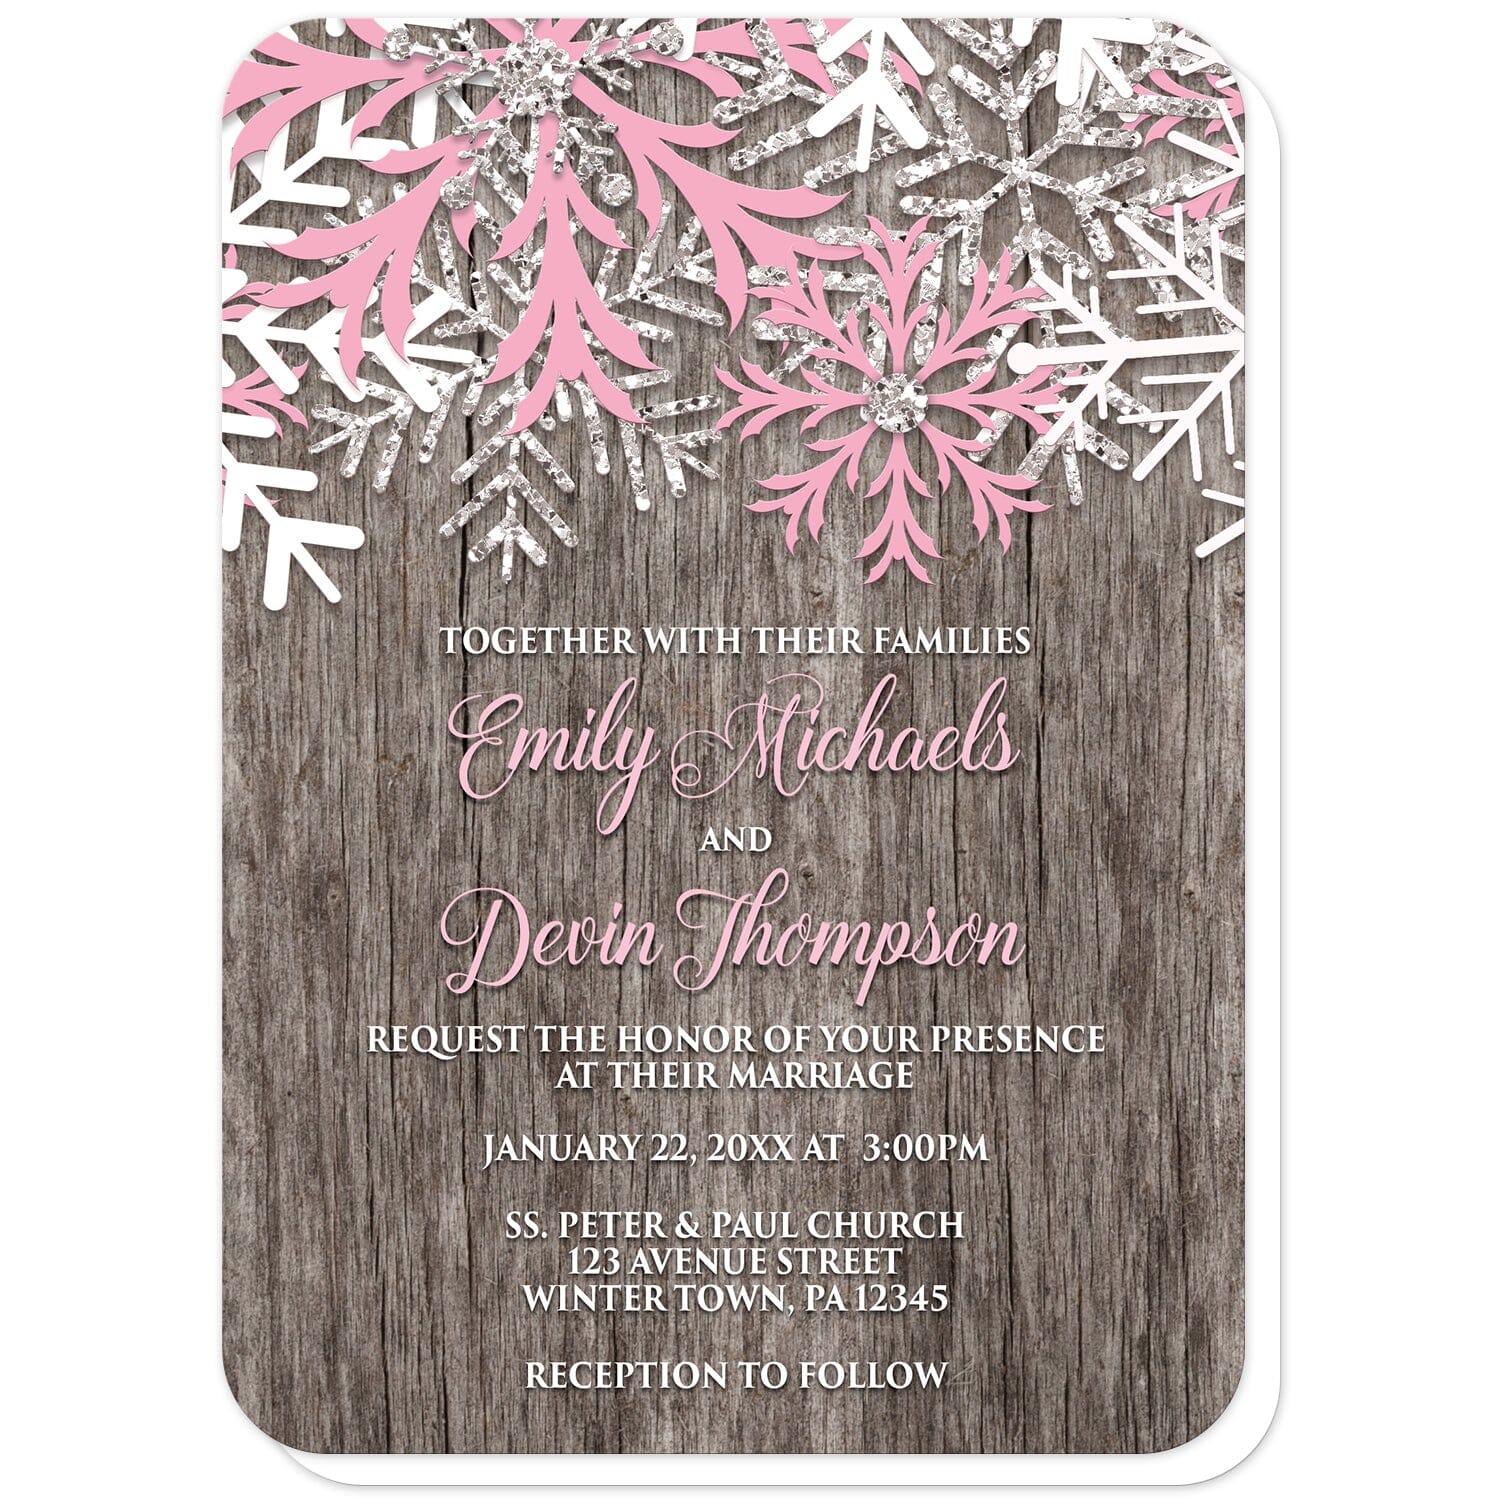 Rustic Winter Wood Pink Snowflake Wedding Invitations (with rounded corners) at Artistically Invited. Country-inspired rustic winter wood pink snowflake wedding invitations designed with pink, white, and silver-colored glitter-illustrated snowflakes along the top over a rustic wood pattern illustration. Your personalized marriage celebration details are custom printed in pink and white over the wood background below the snowflakes.